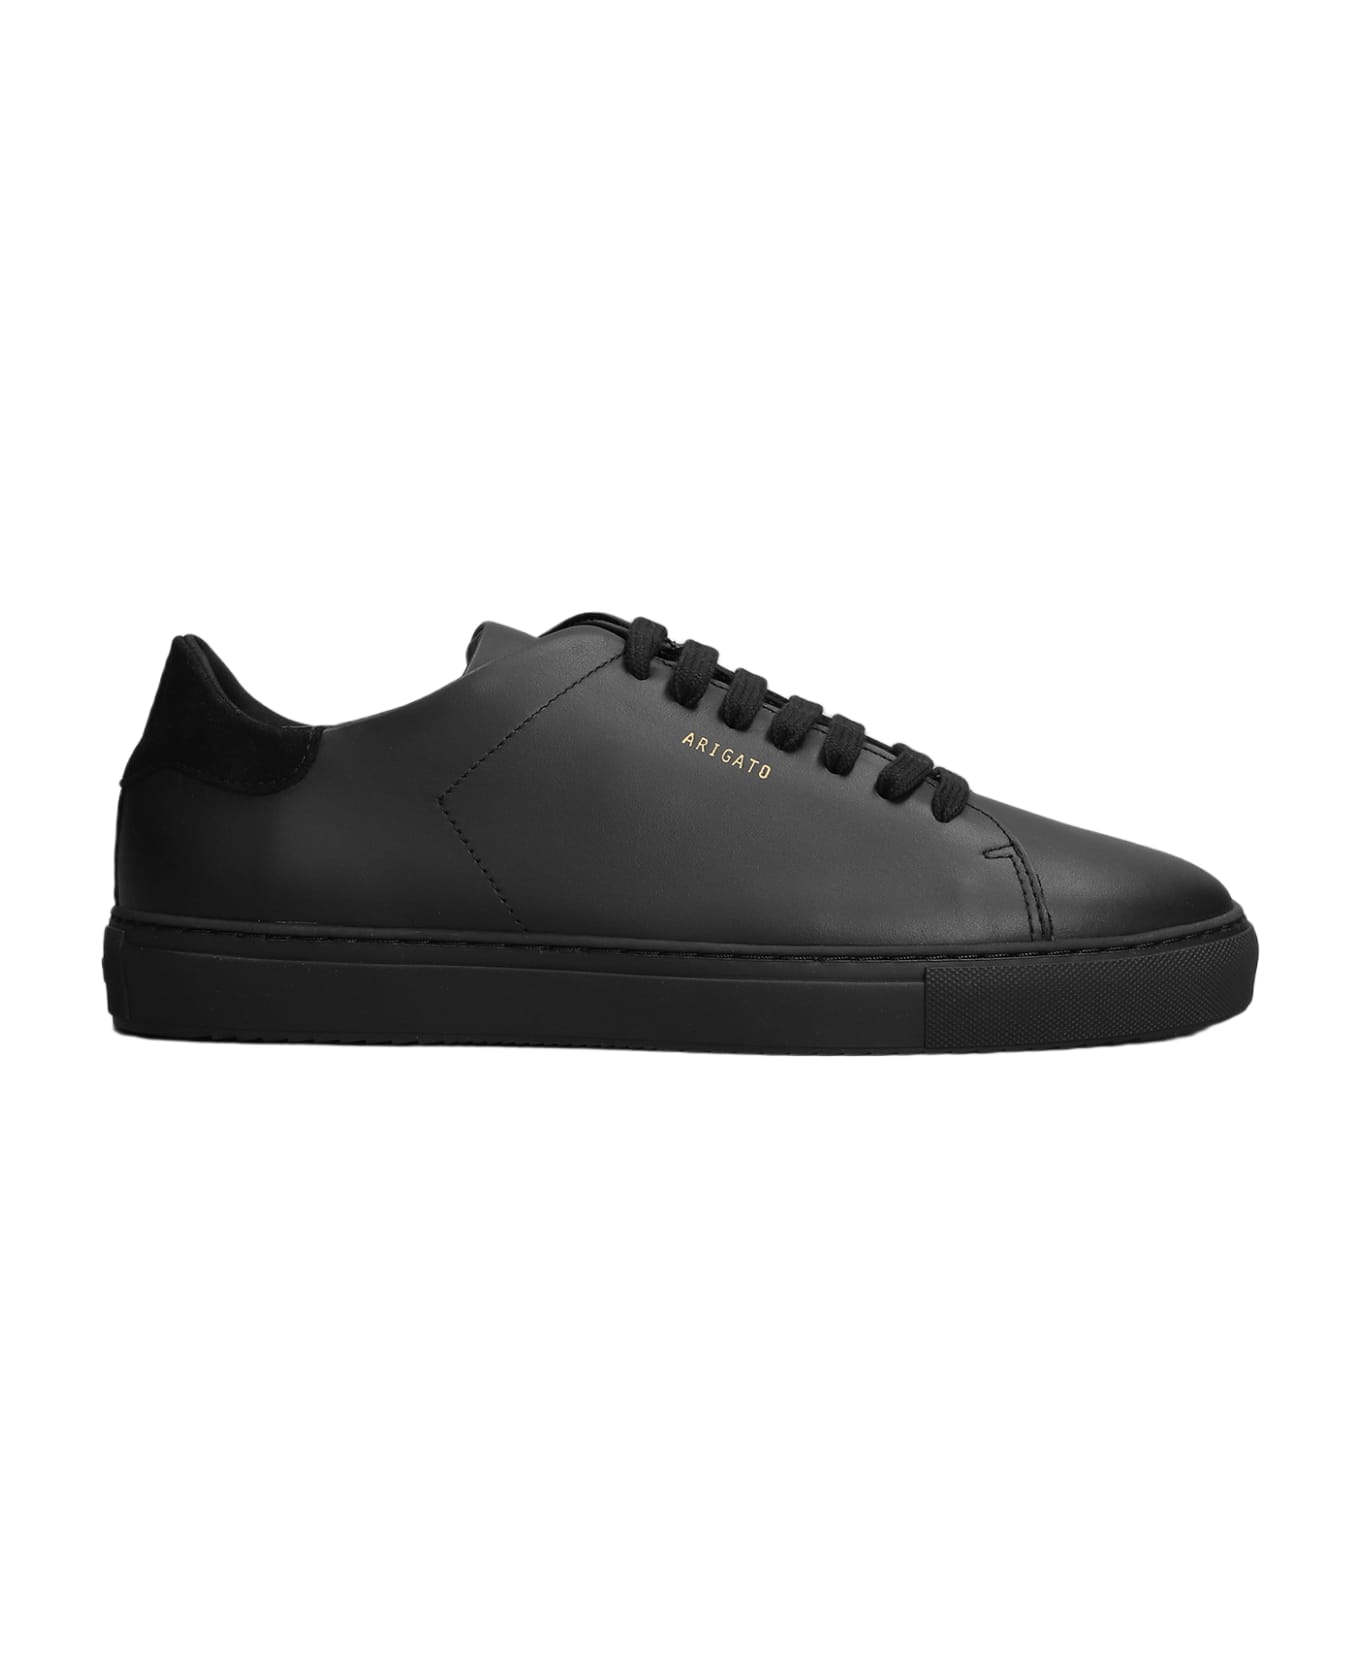 Axel Arigato Clean 90 Sneakers In Black Suede And Leather - Nero nero スニーカー